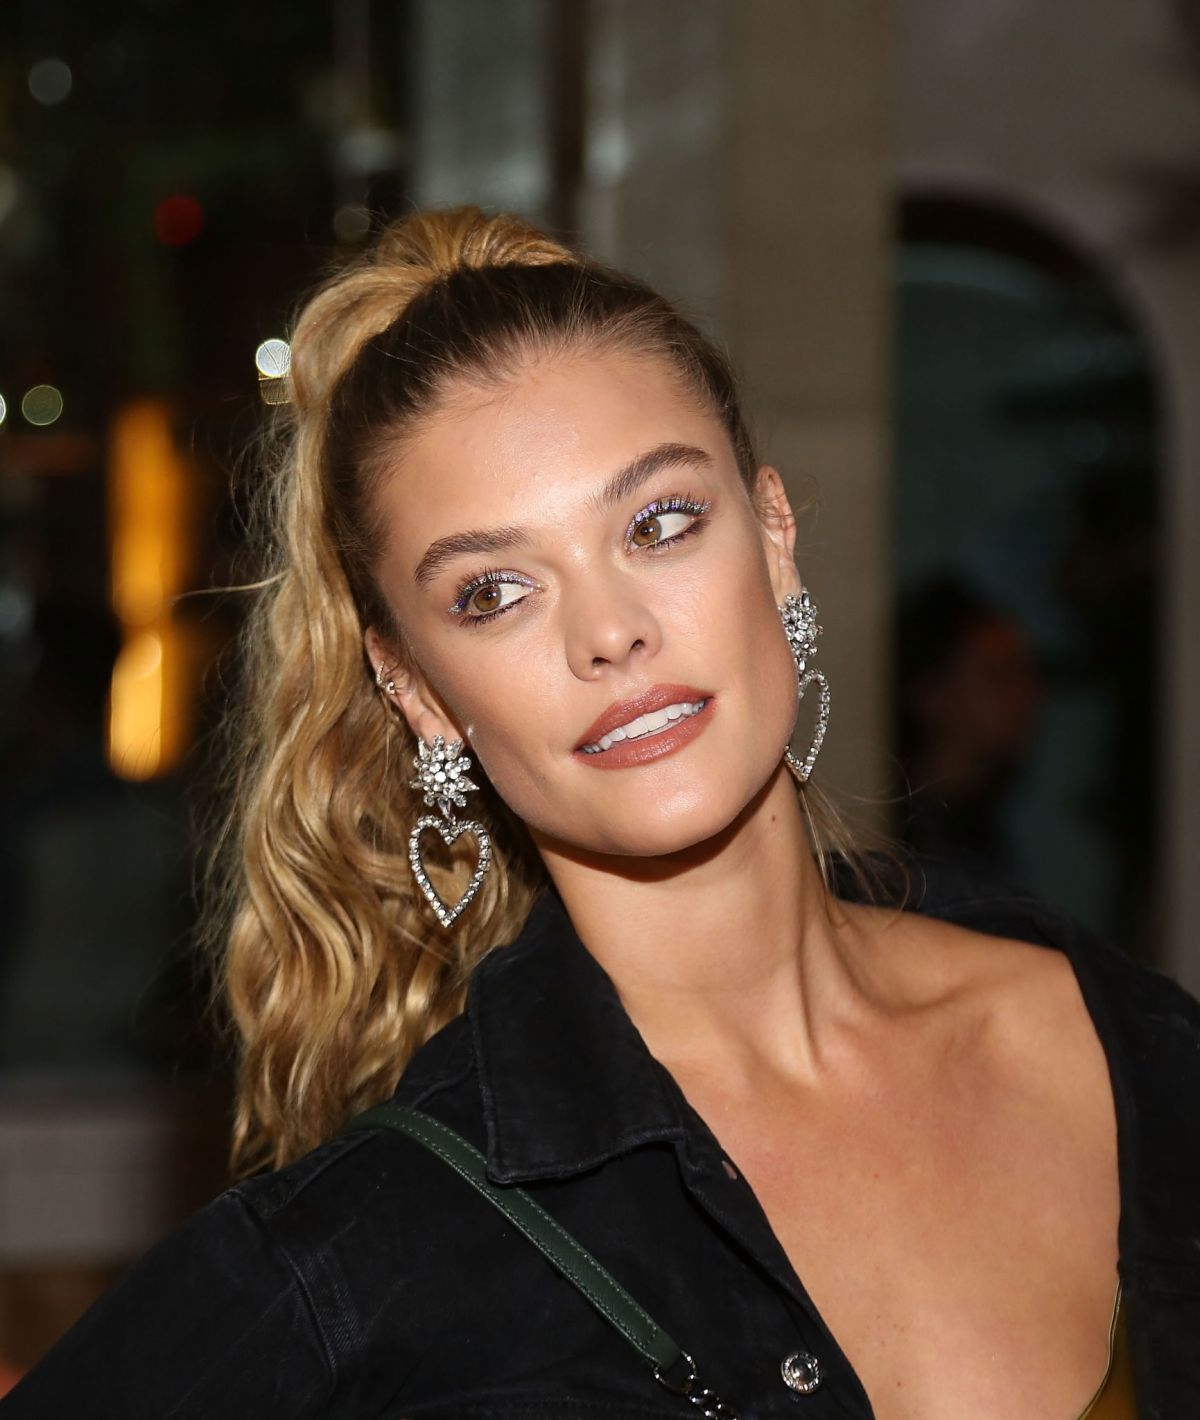 Nina Agdal Attends the celebration of the 10 Year Anniversary of ...